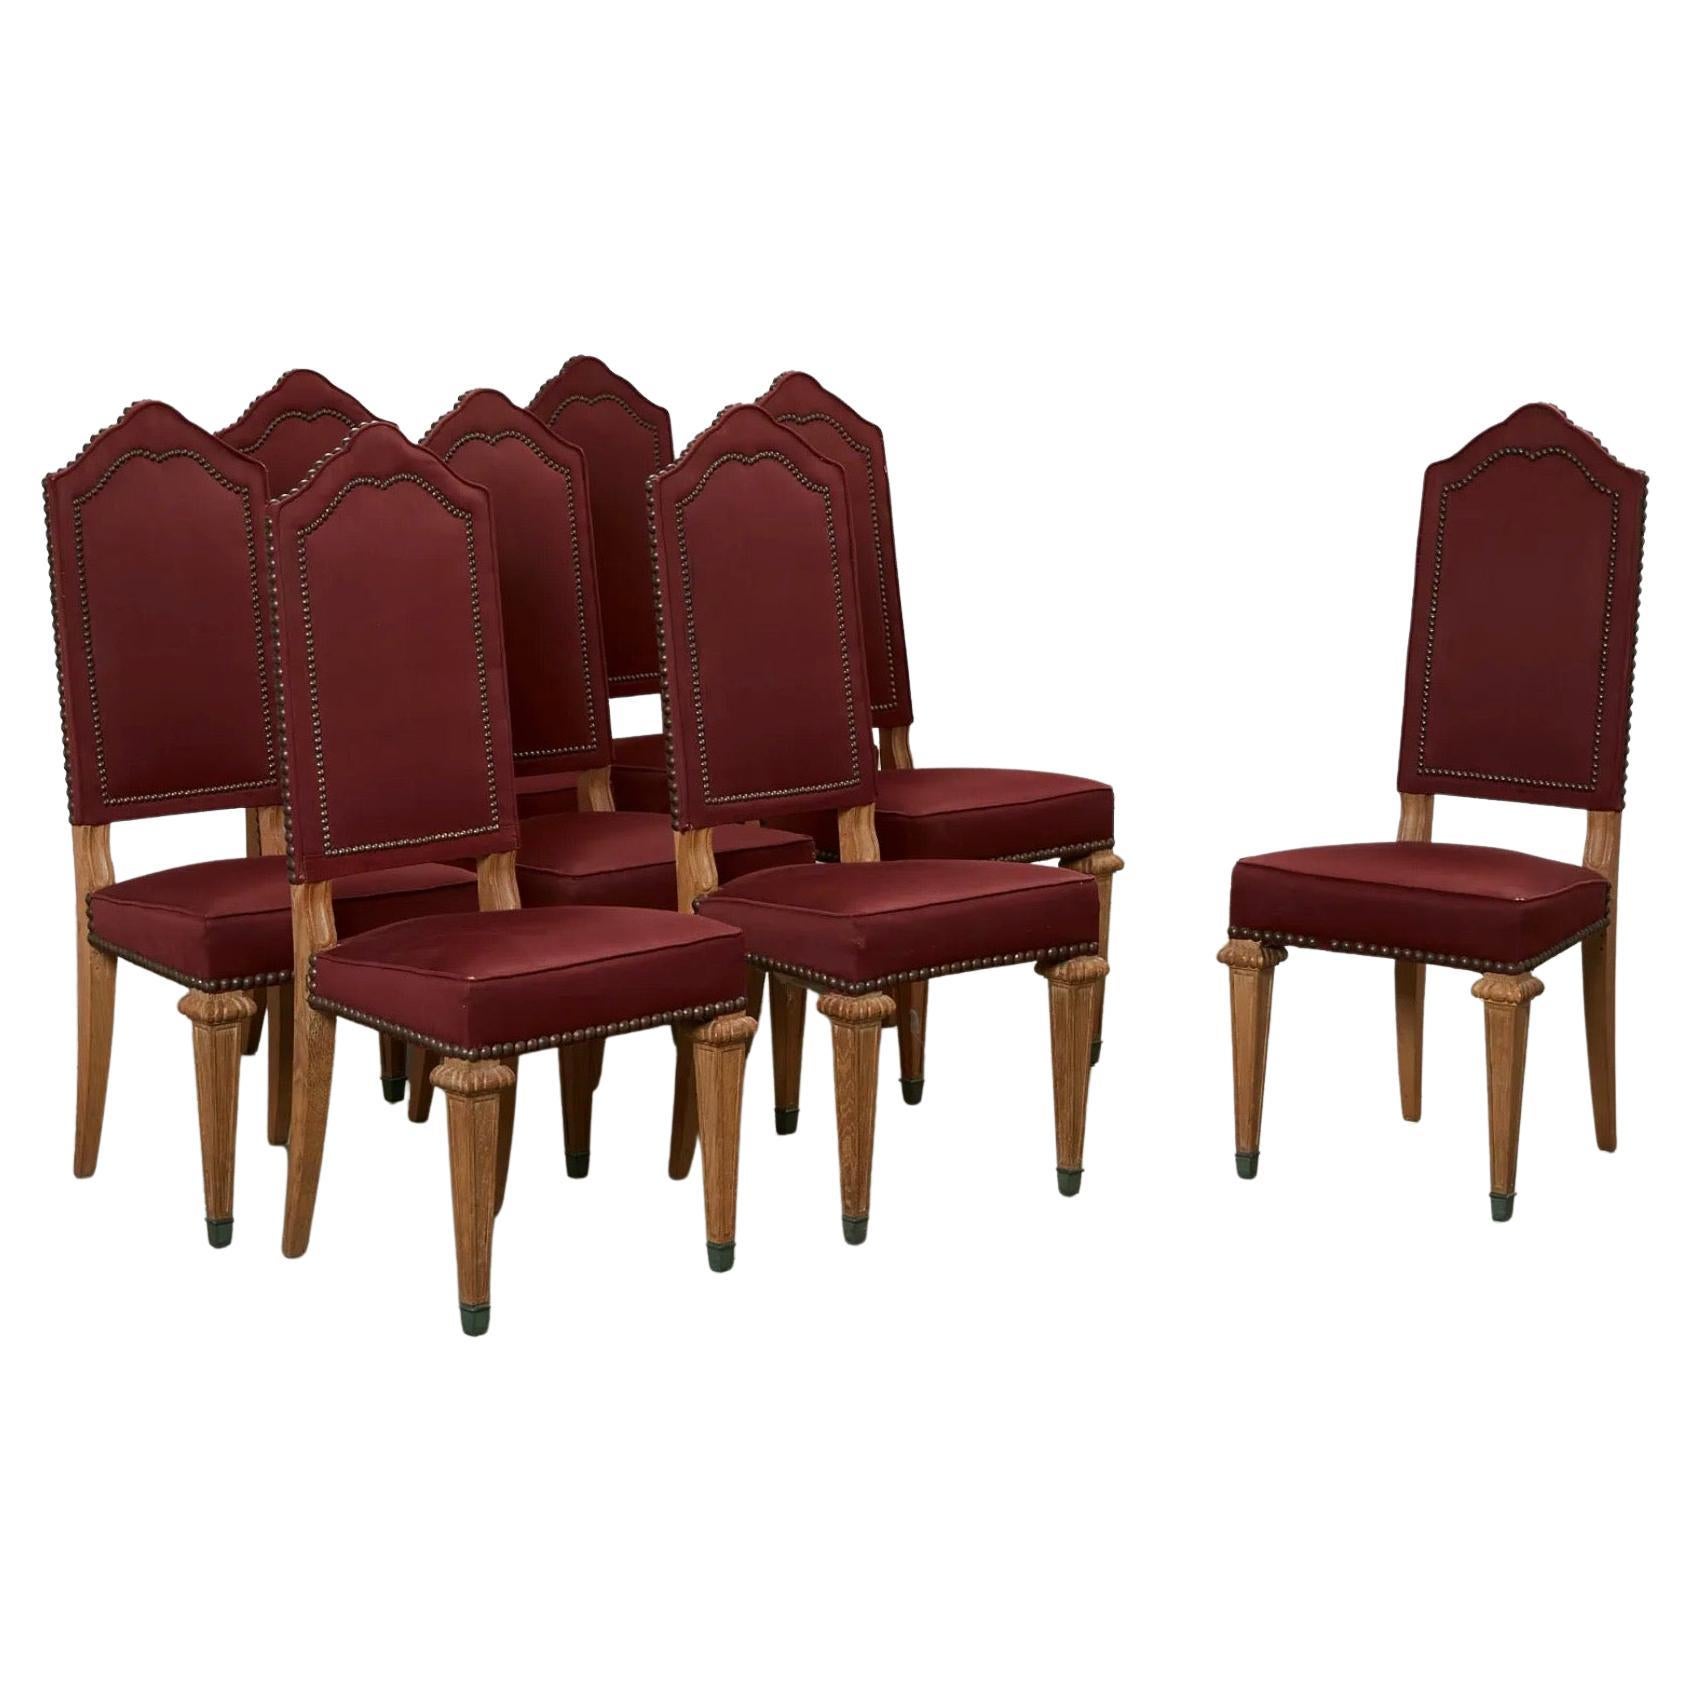 Set of 8 Baroque-Style Dining Chairs For Sale